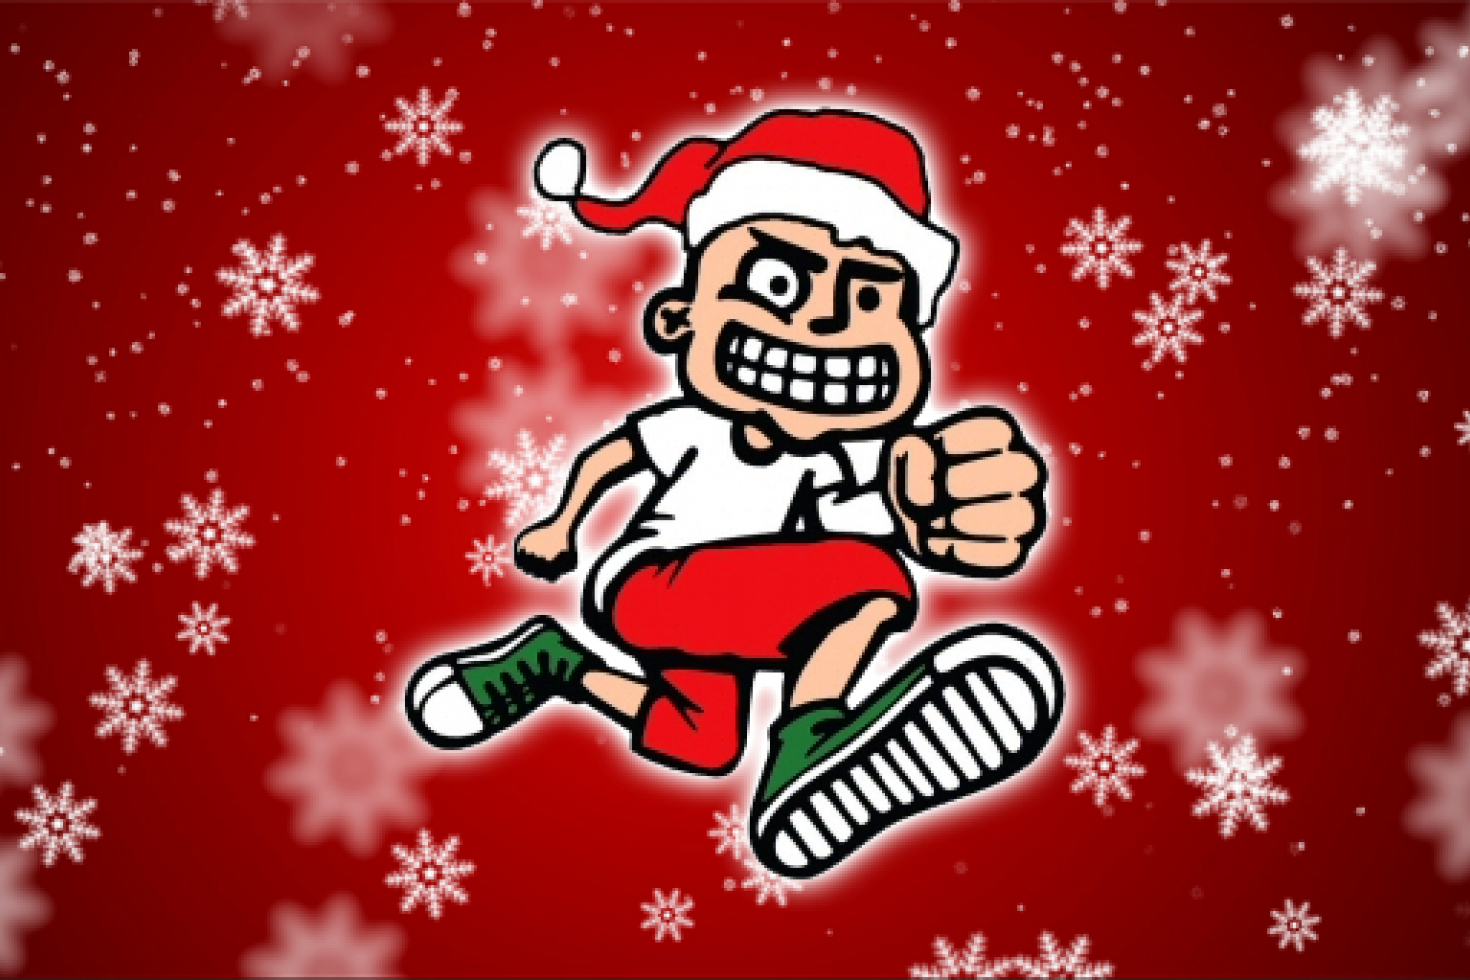 News MxPx release song called “Another Christmas” Punk Rock Theory